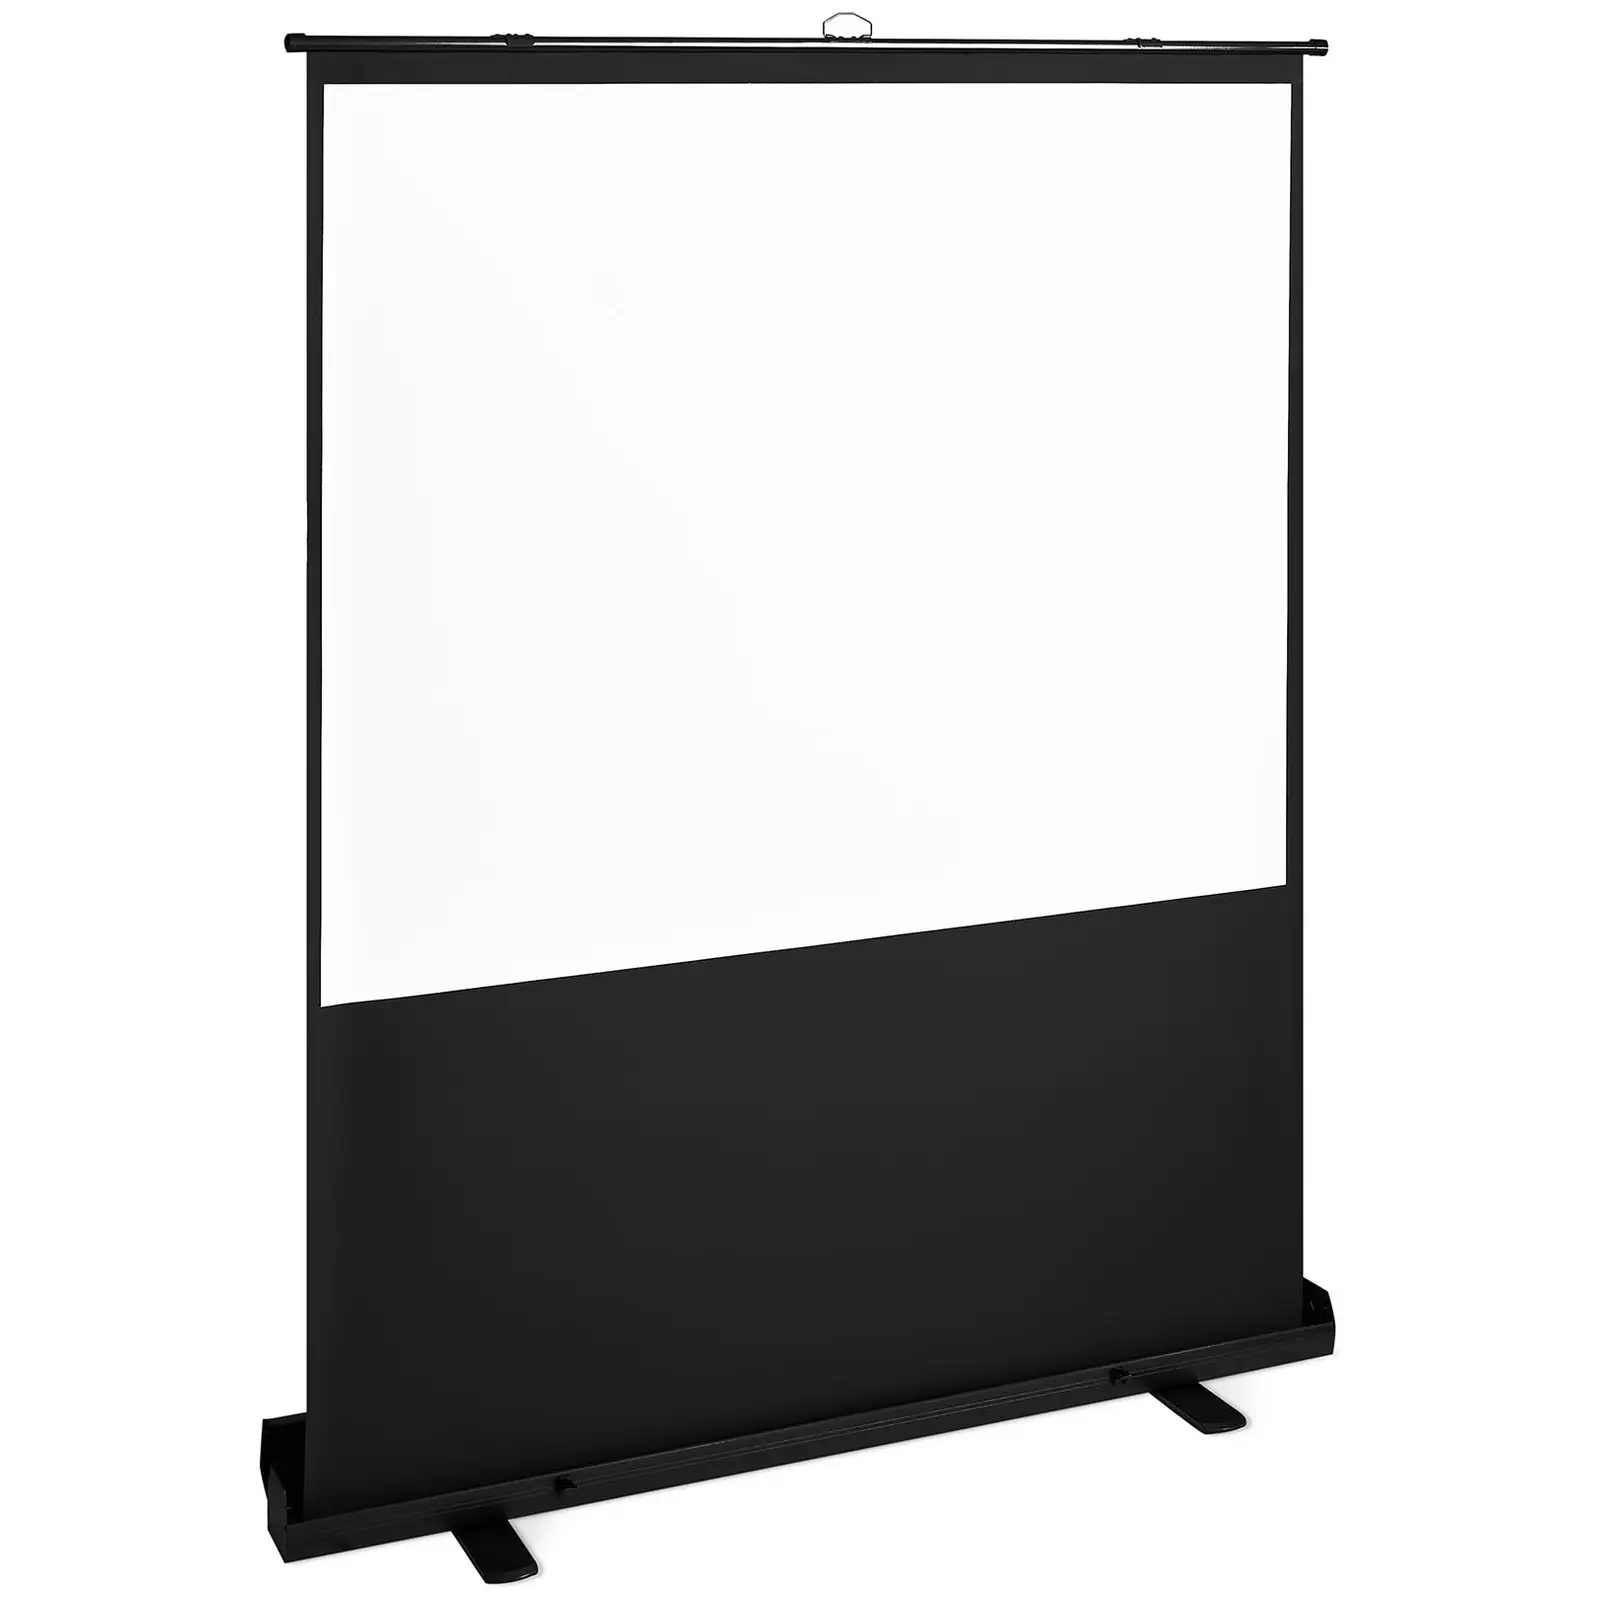 Roll-up Projector Screen - 174 x 203 cm - 4:3 - mobile